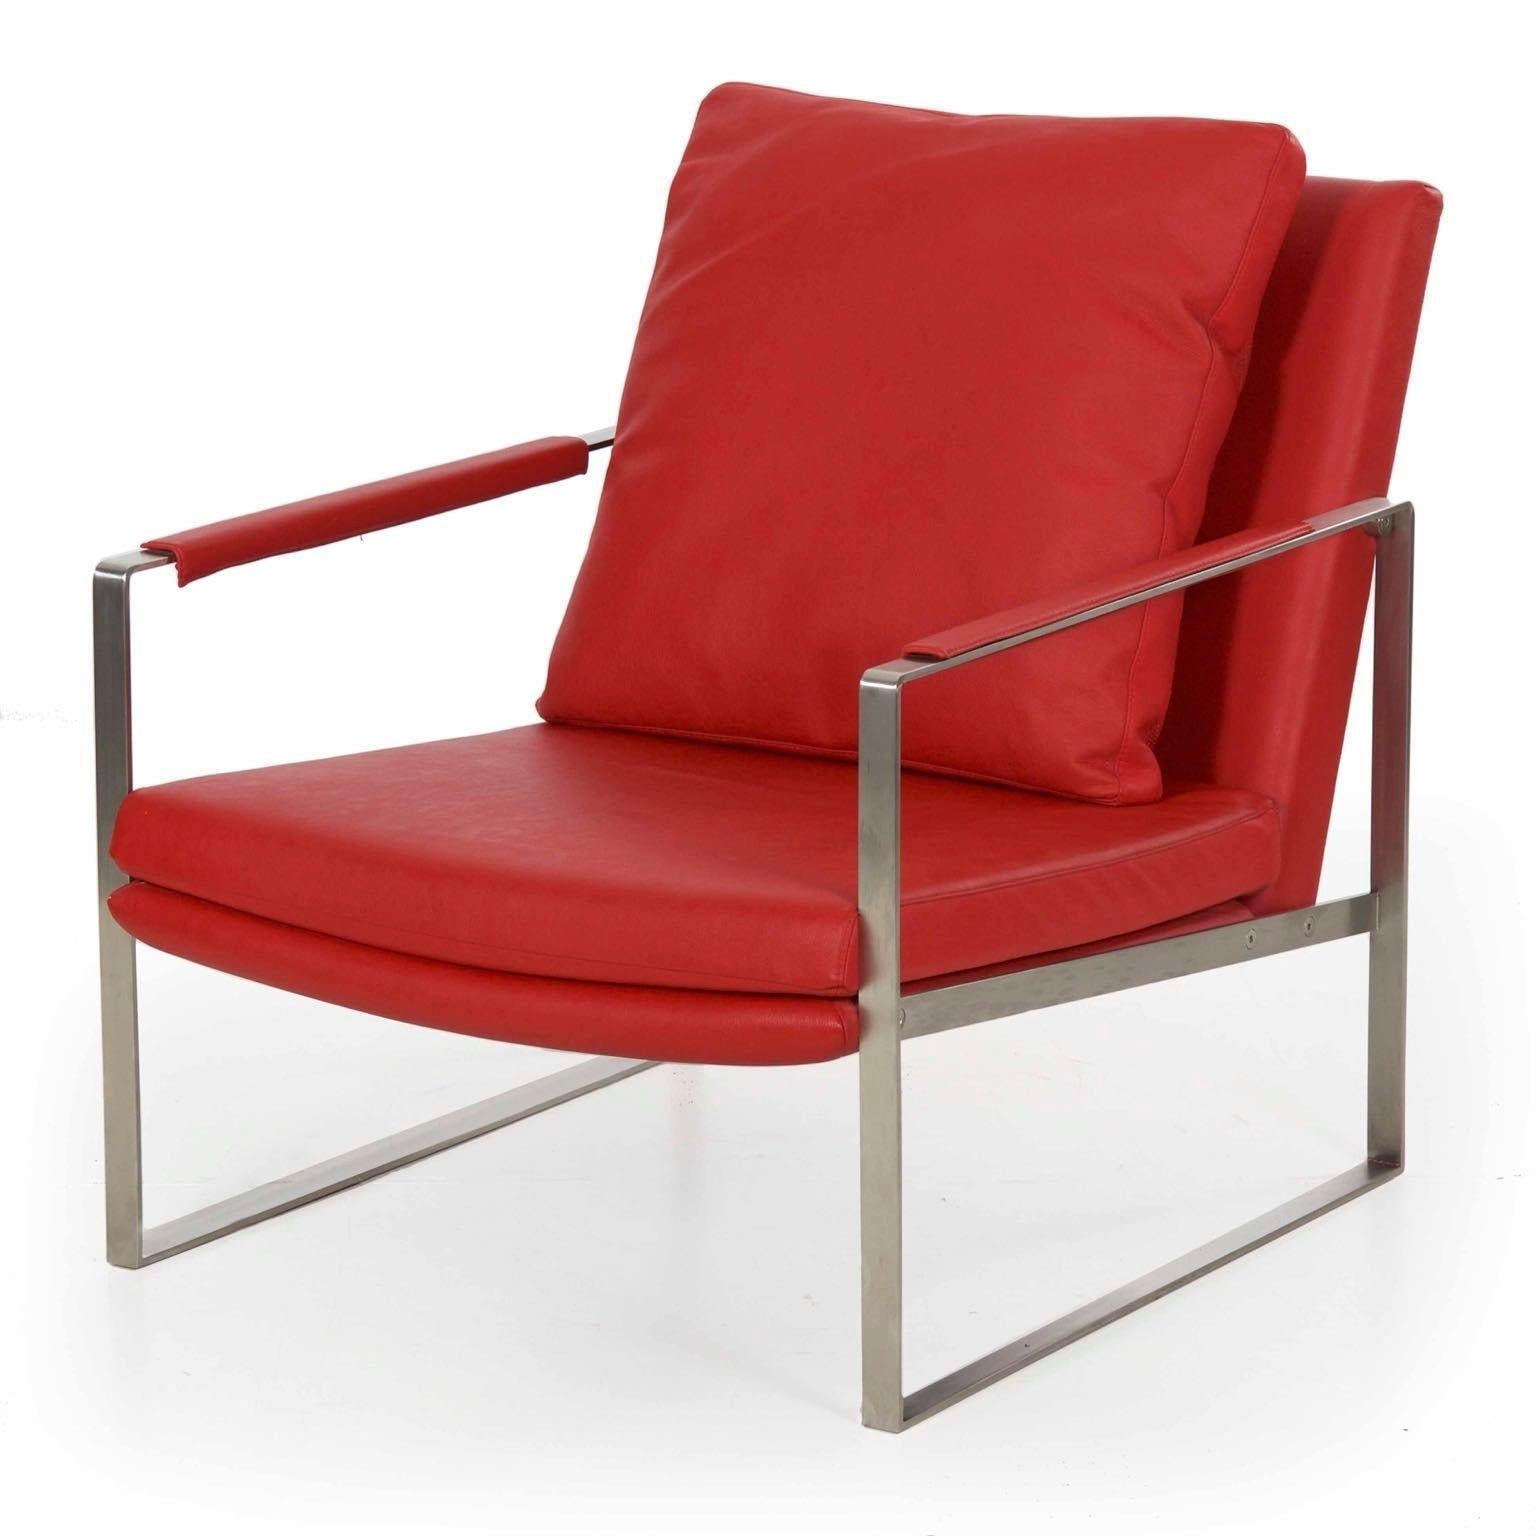 Modern Red Faux-Leather and Brushed Steel Cube Lounge Chair In Good Condition For Sale In Shippensburg, PA